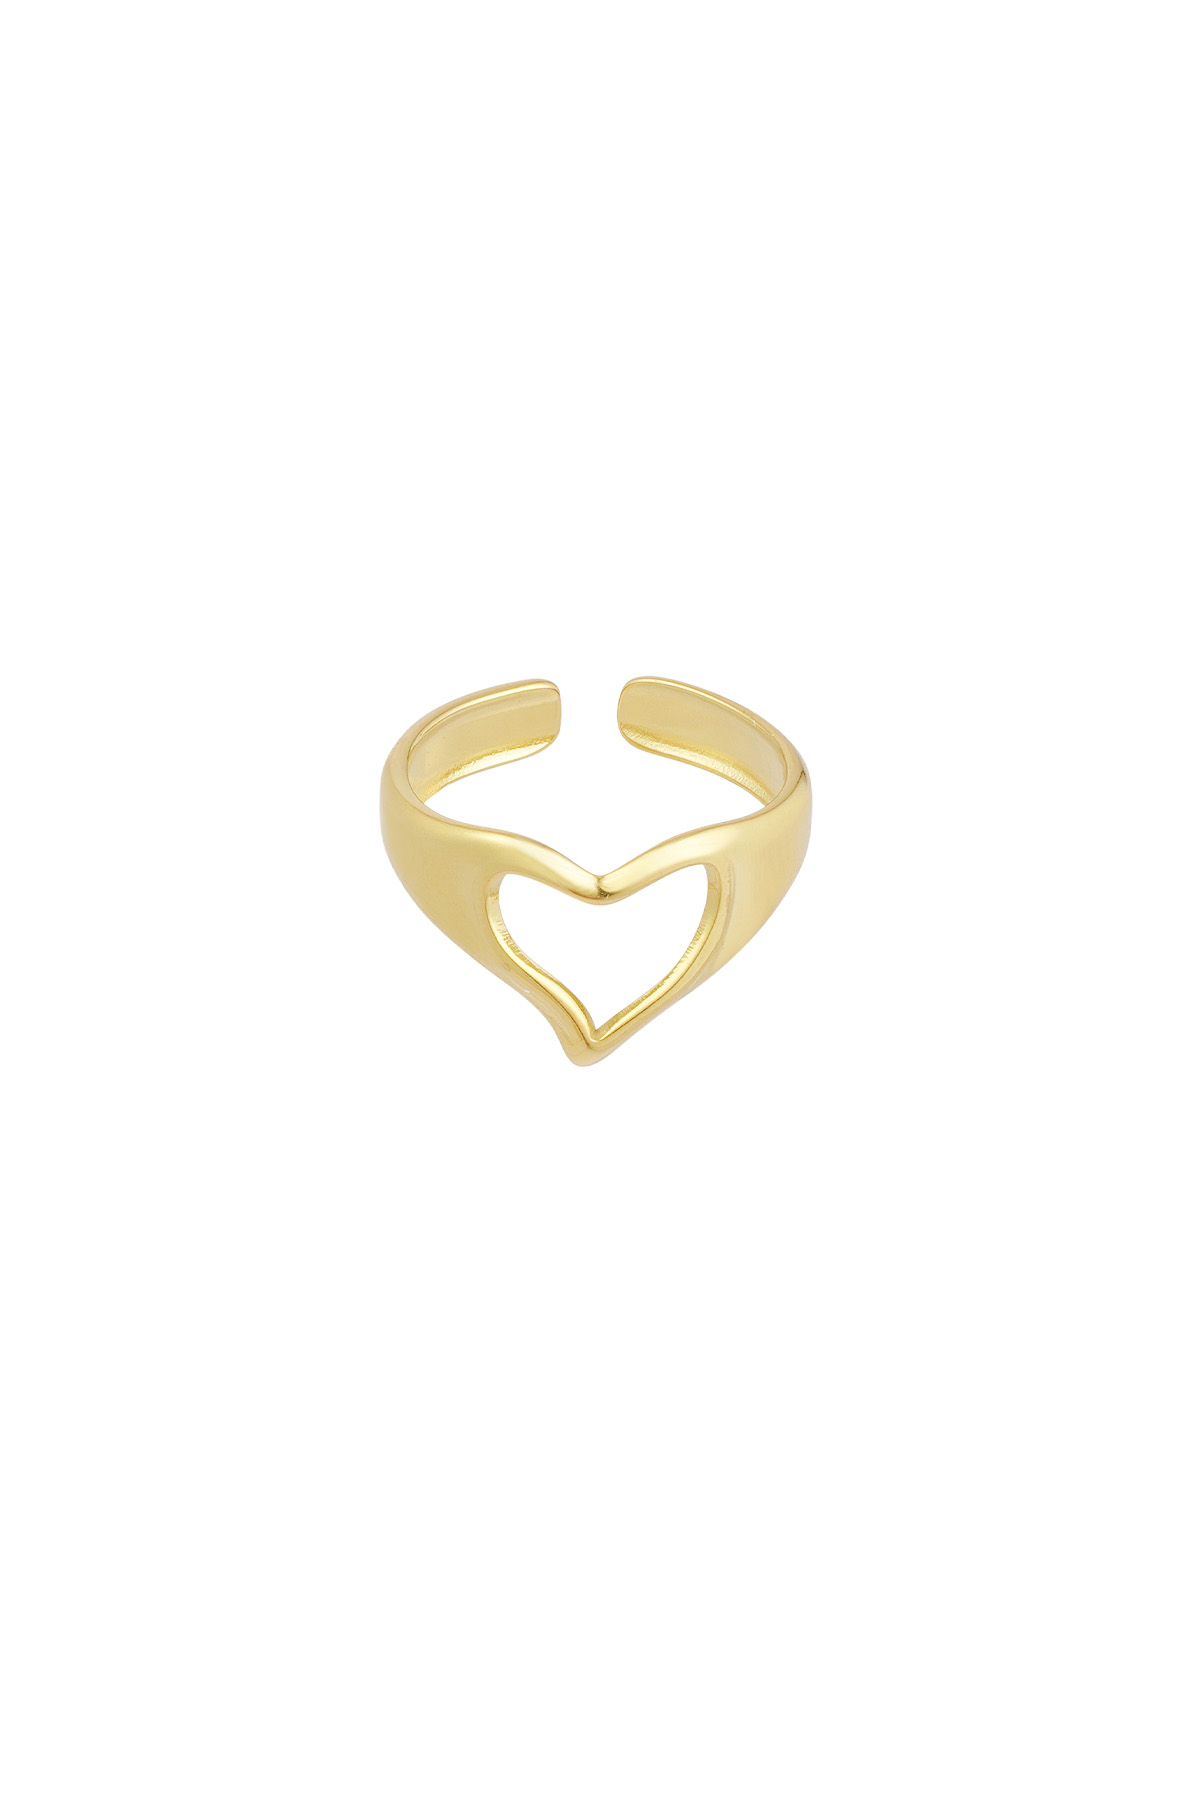 Ring love hands - gold h5 